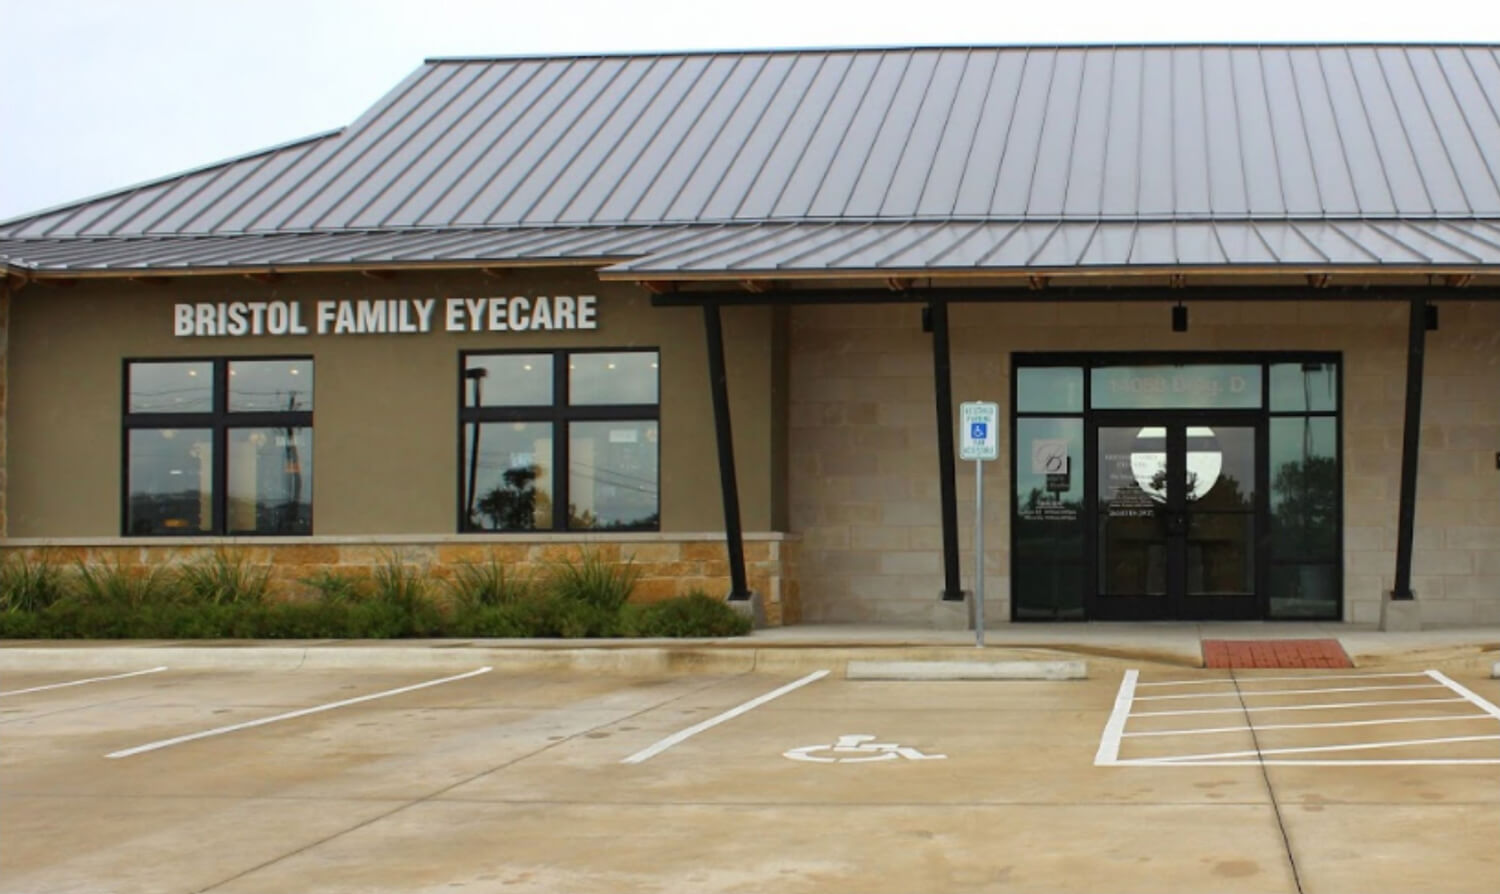 Bristol Family Eyecare in Bee Cave